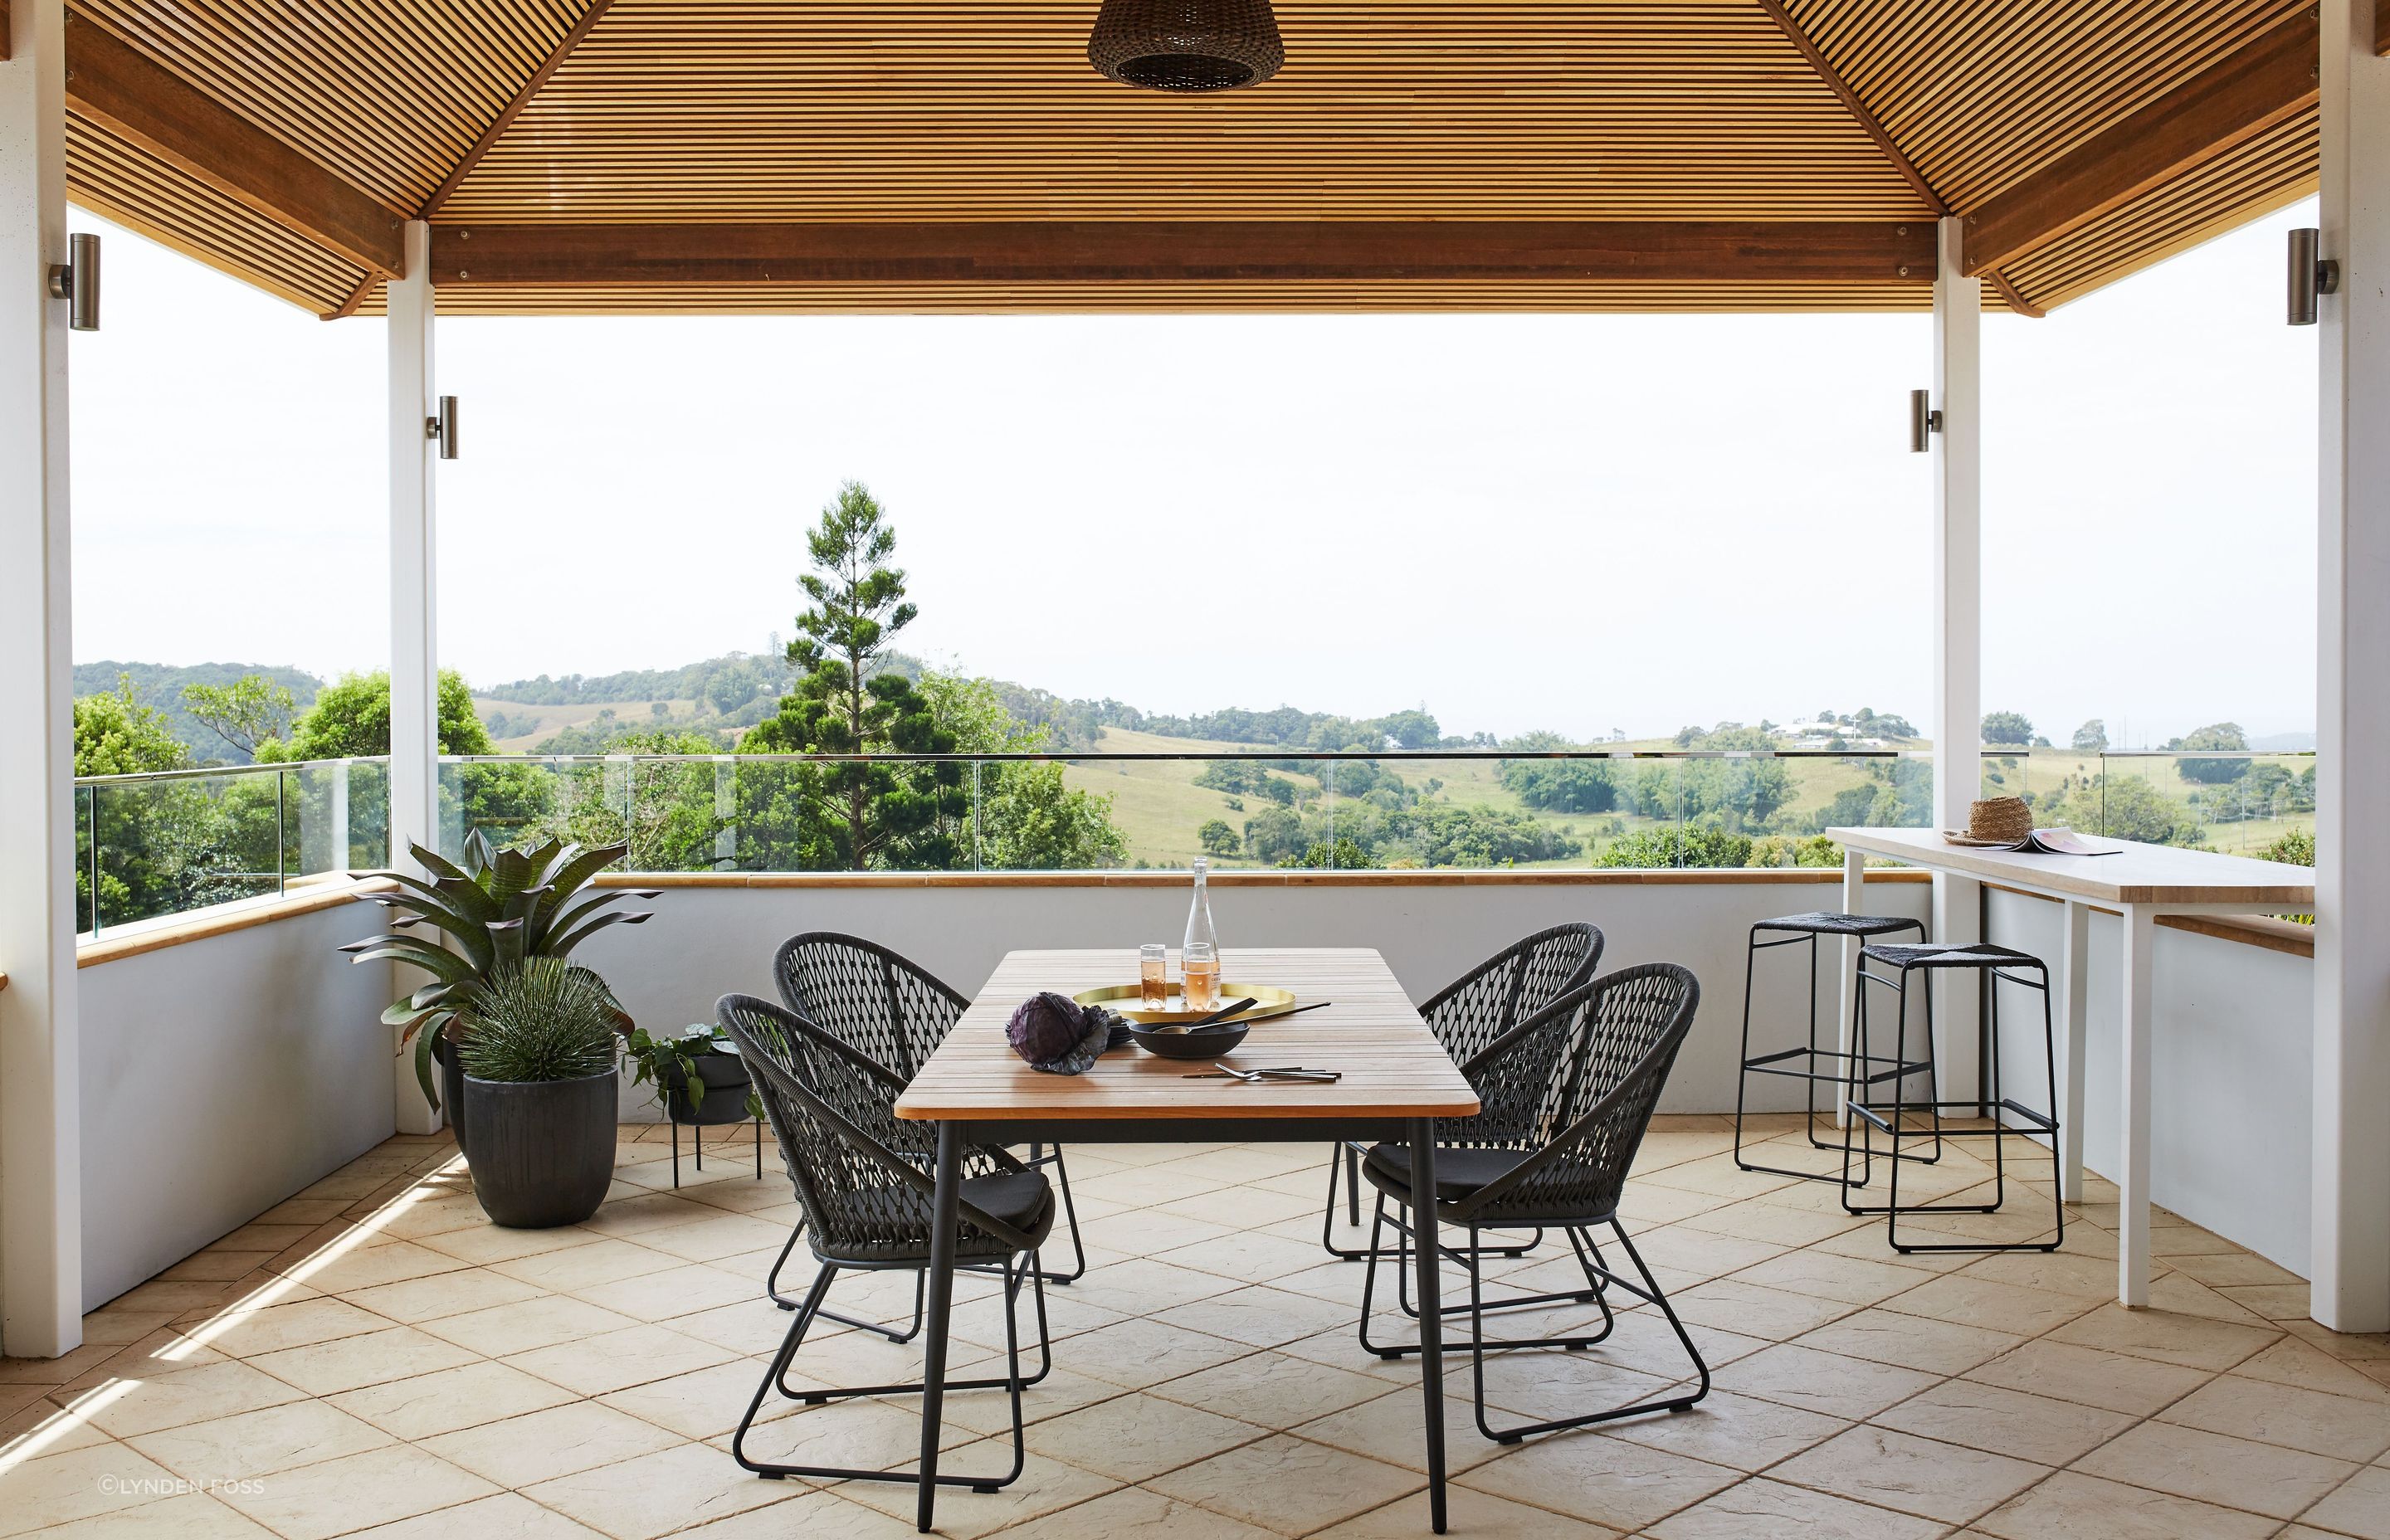 The outdoor living space was reinvigorated with new tiles and ceiling cladding.